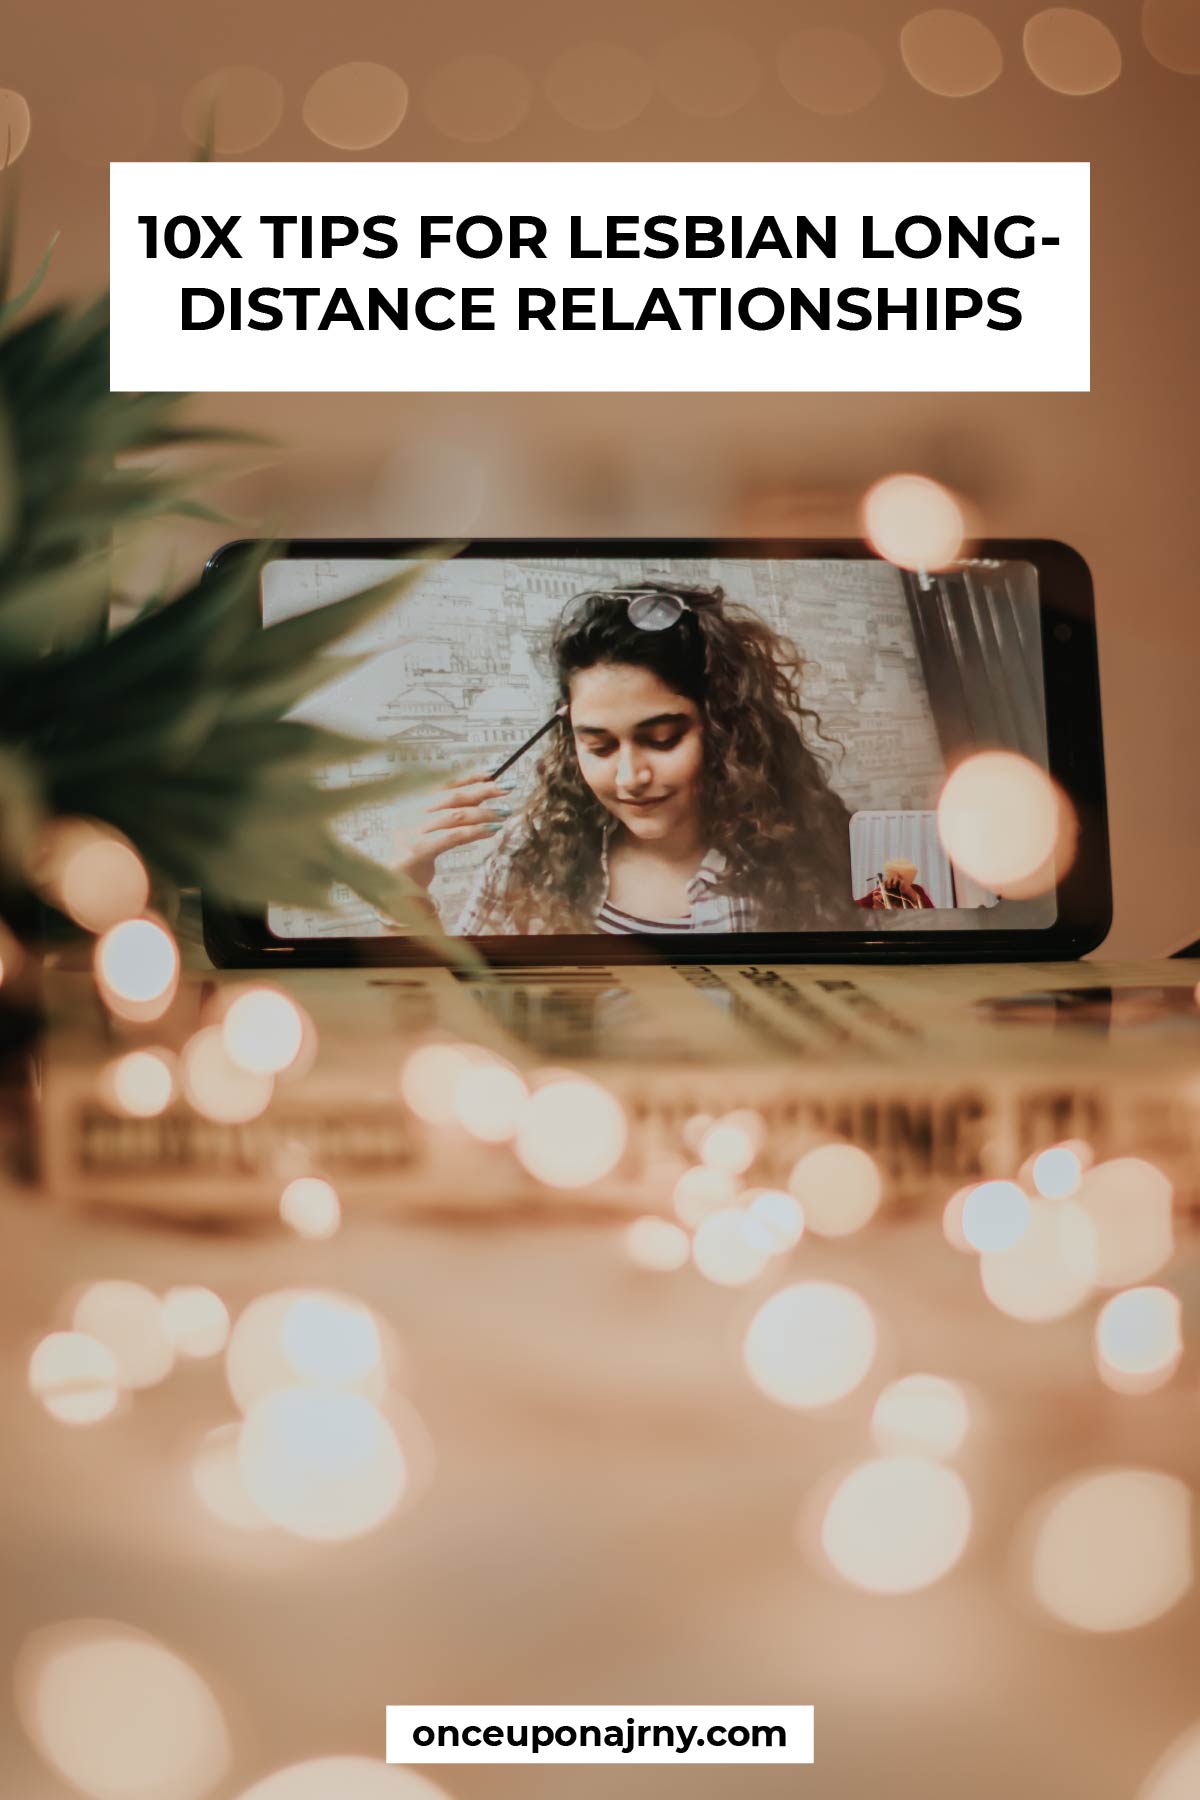 10 Tips for Lesbian Long-Distance Relationships photo by Dollar Gill Unsplash